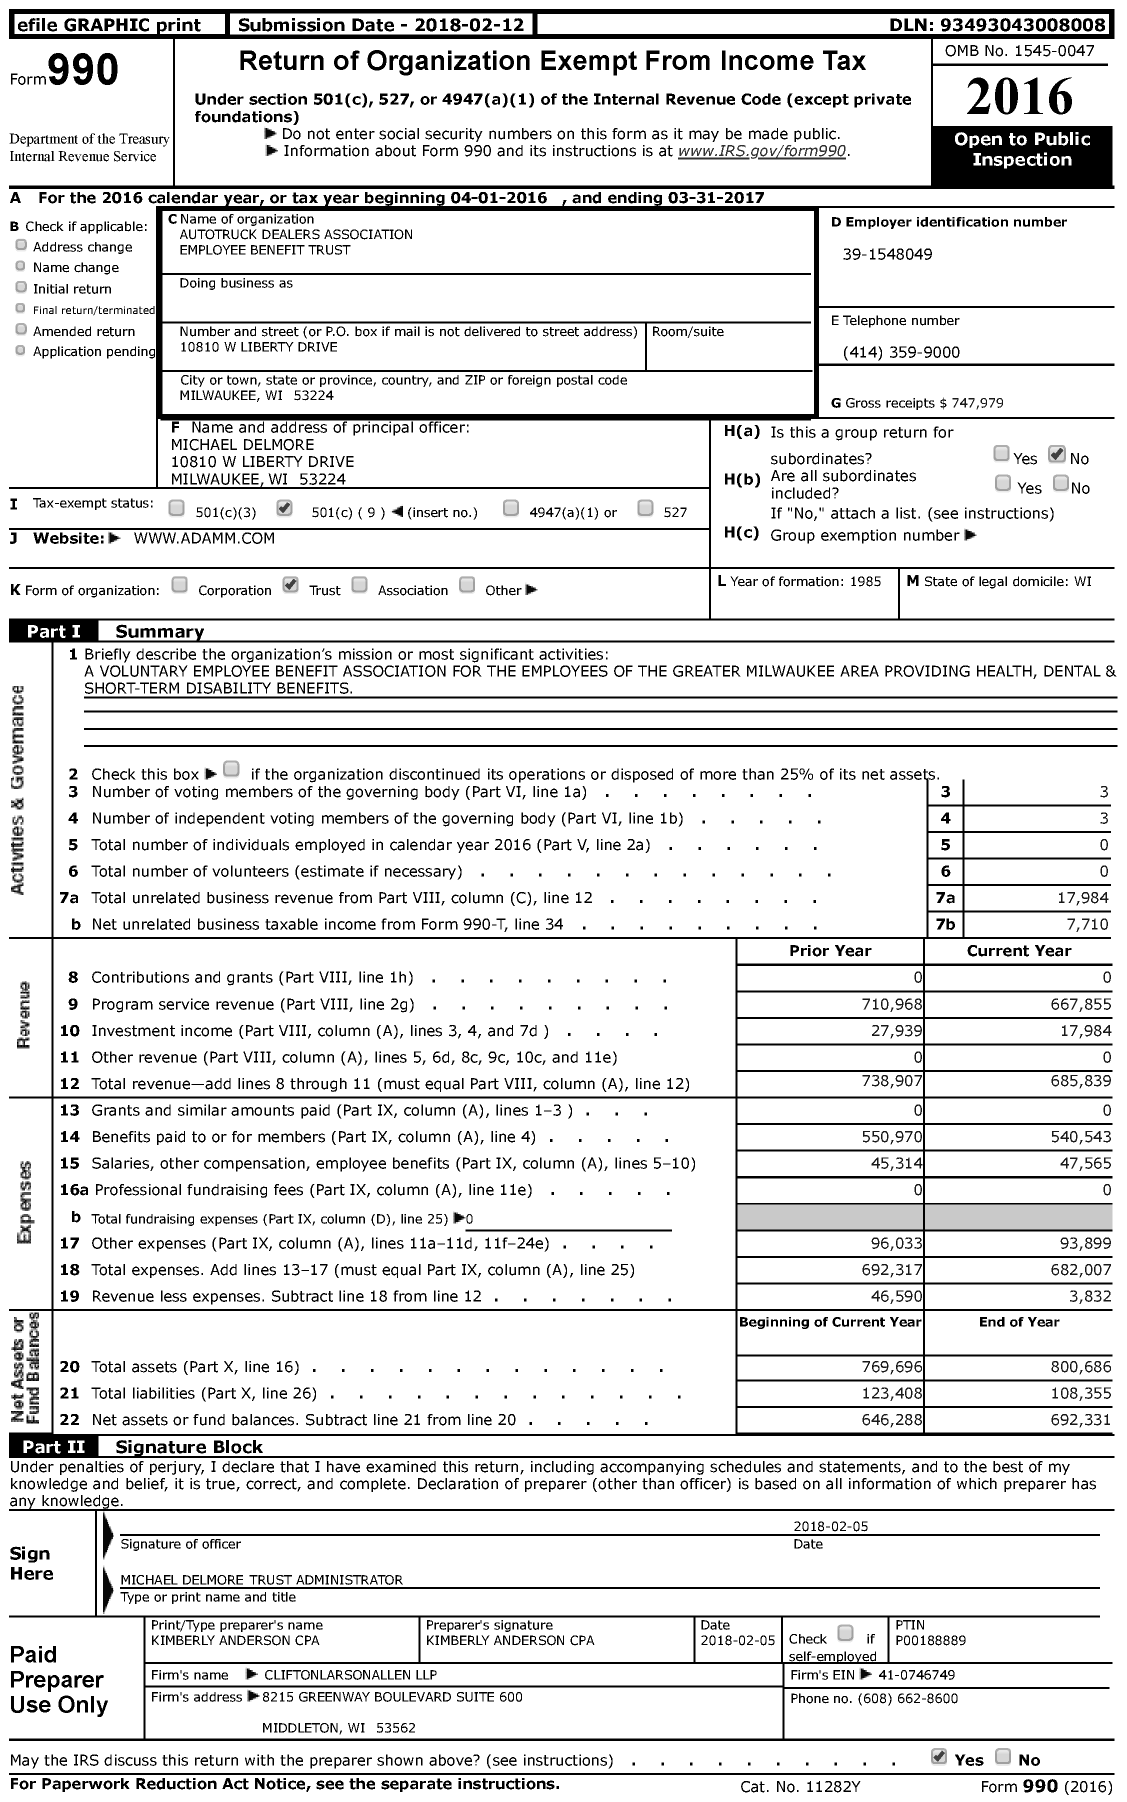 Image of first page of 2016 Form 990 for Autotruck Dealers Association Employee Benefit Trust